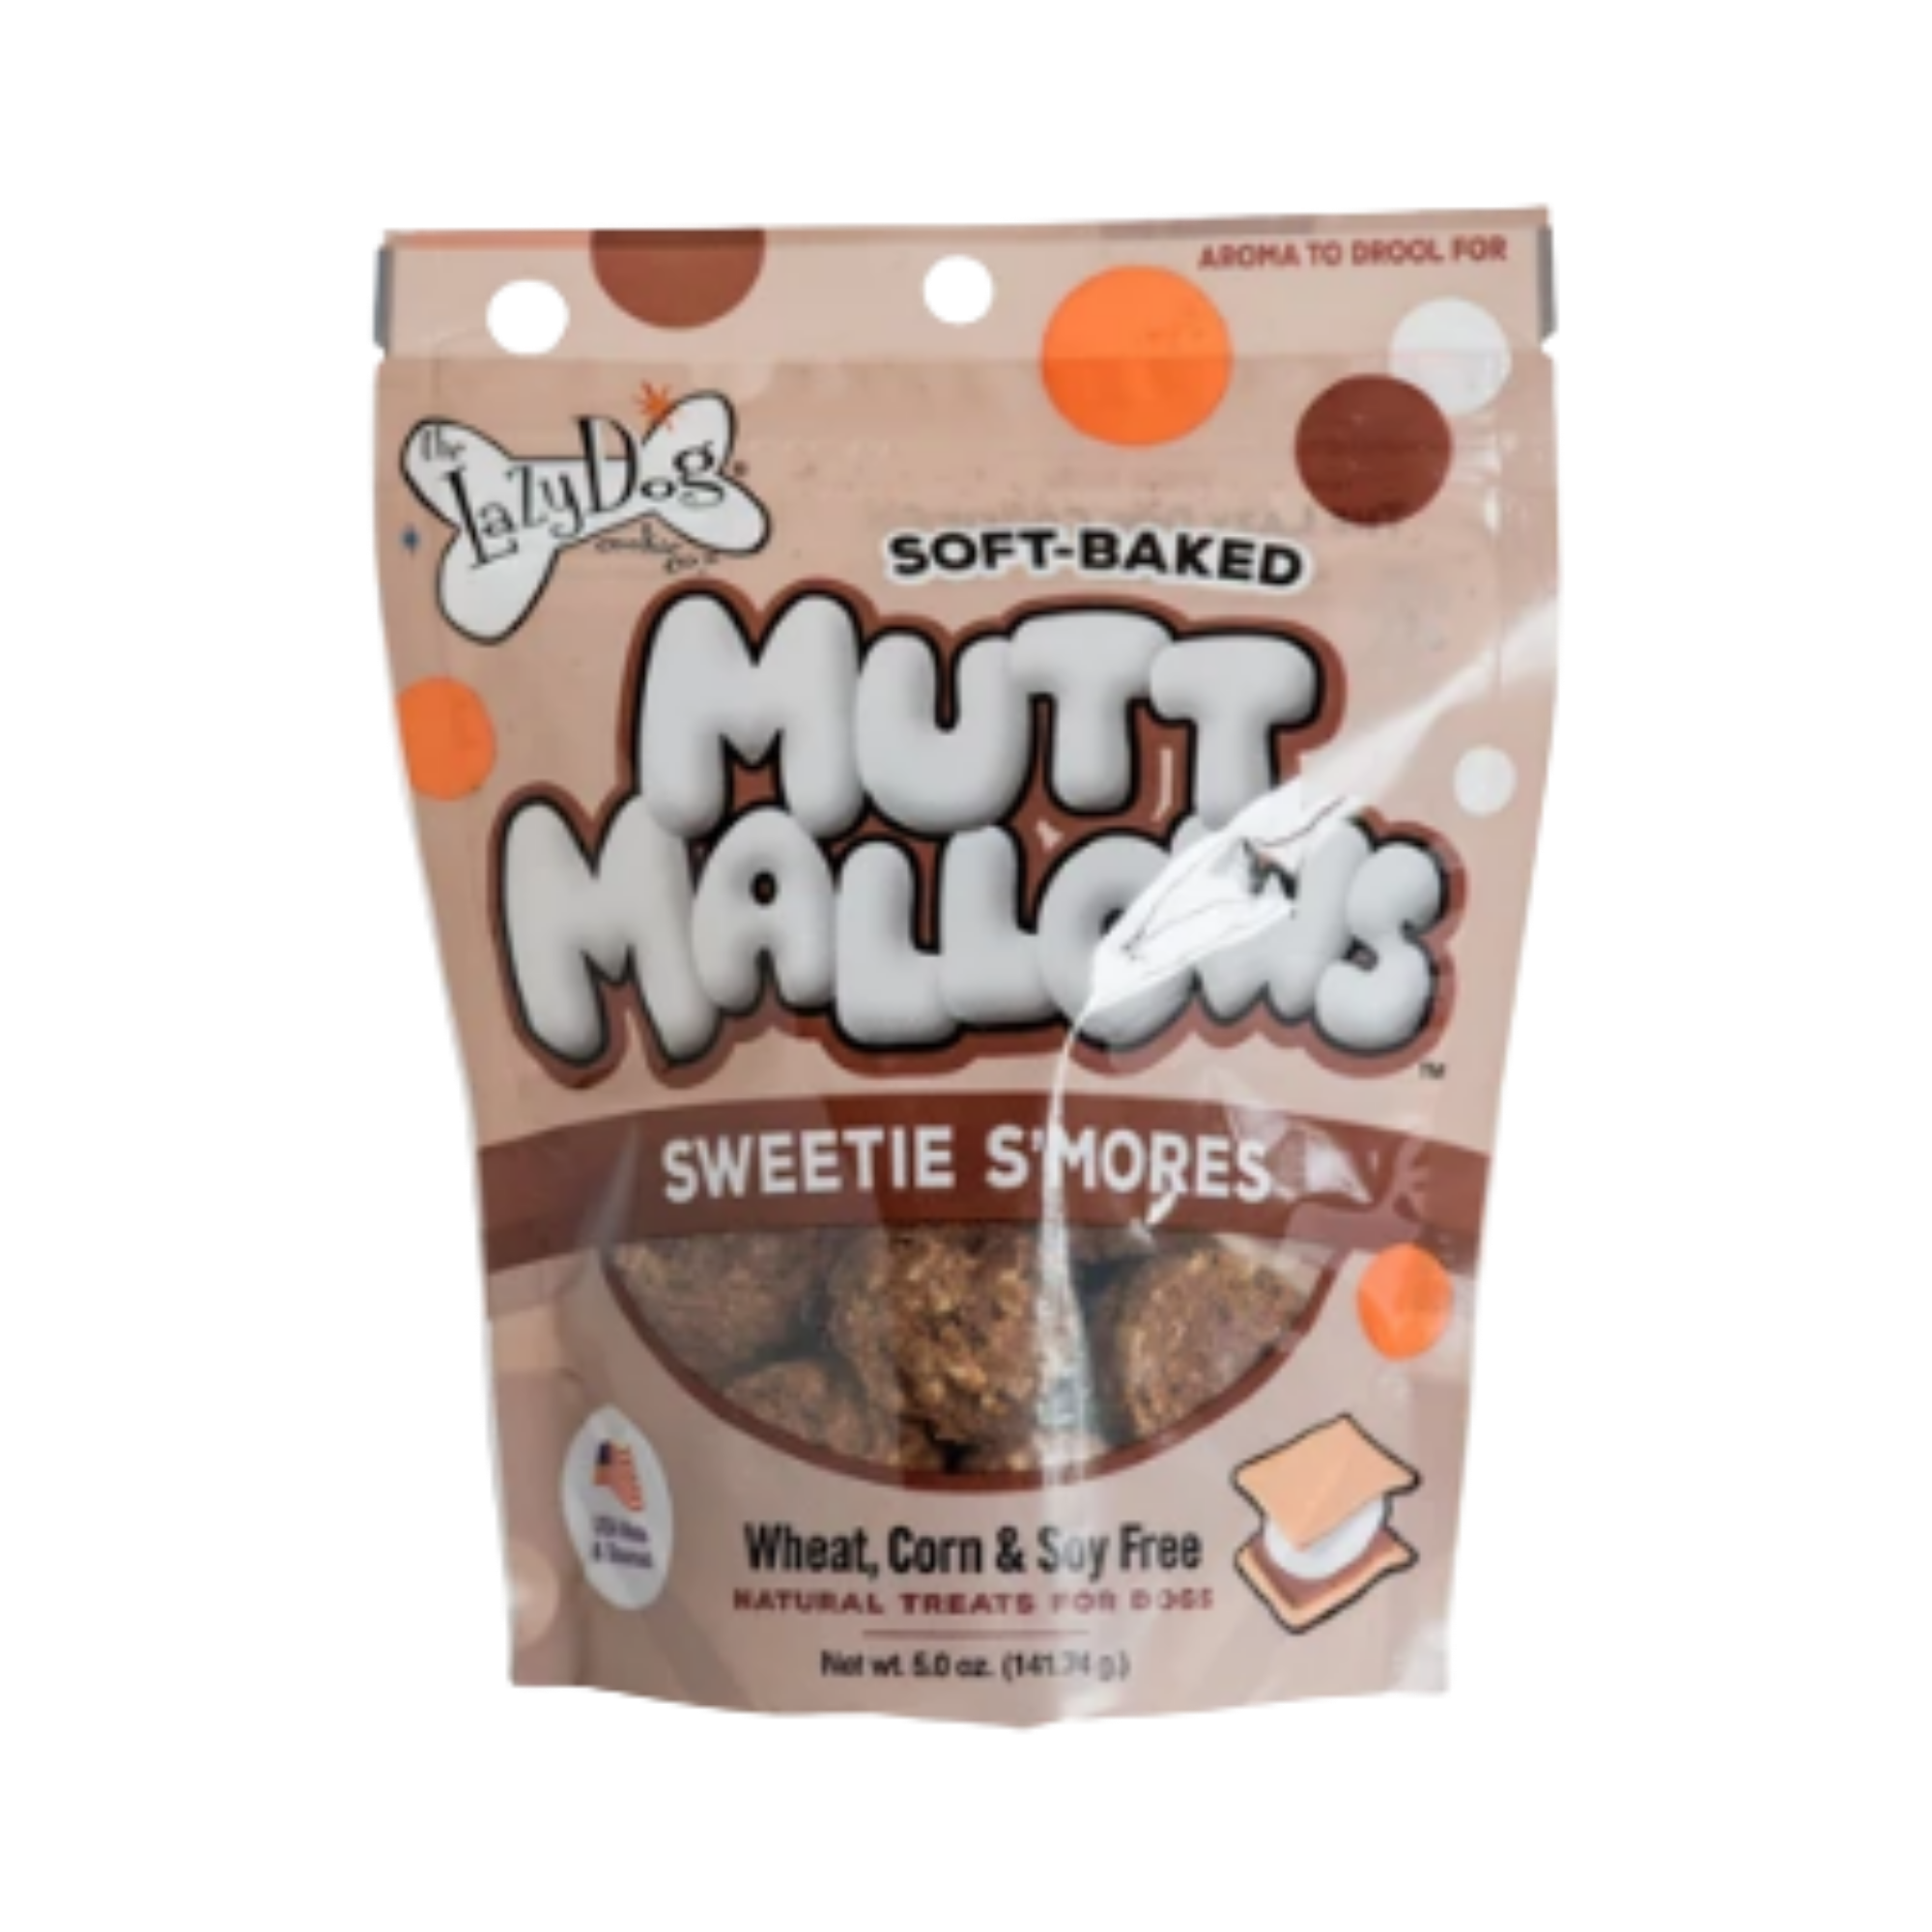 The Lazy Dog Cookie Company Sweetie S'mores Mutt Mallows Treats, 5 oz - Mutts & Co.